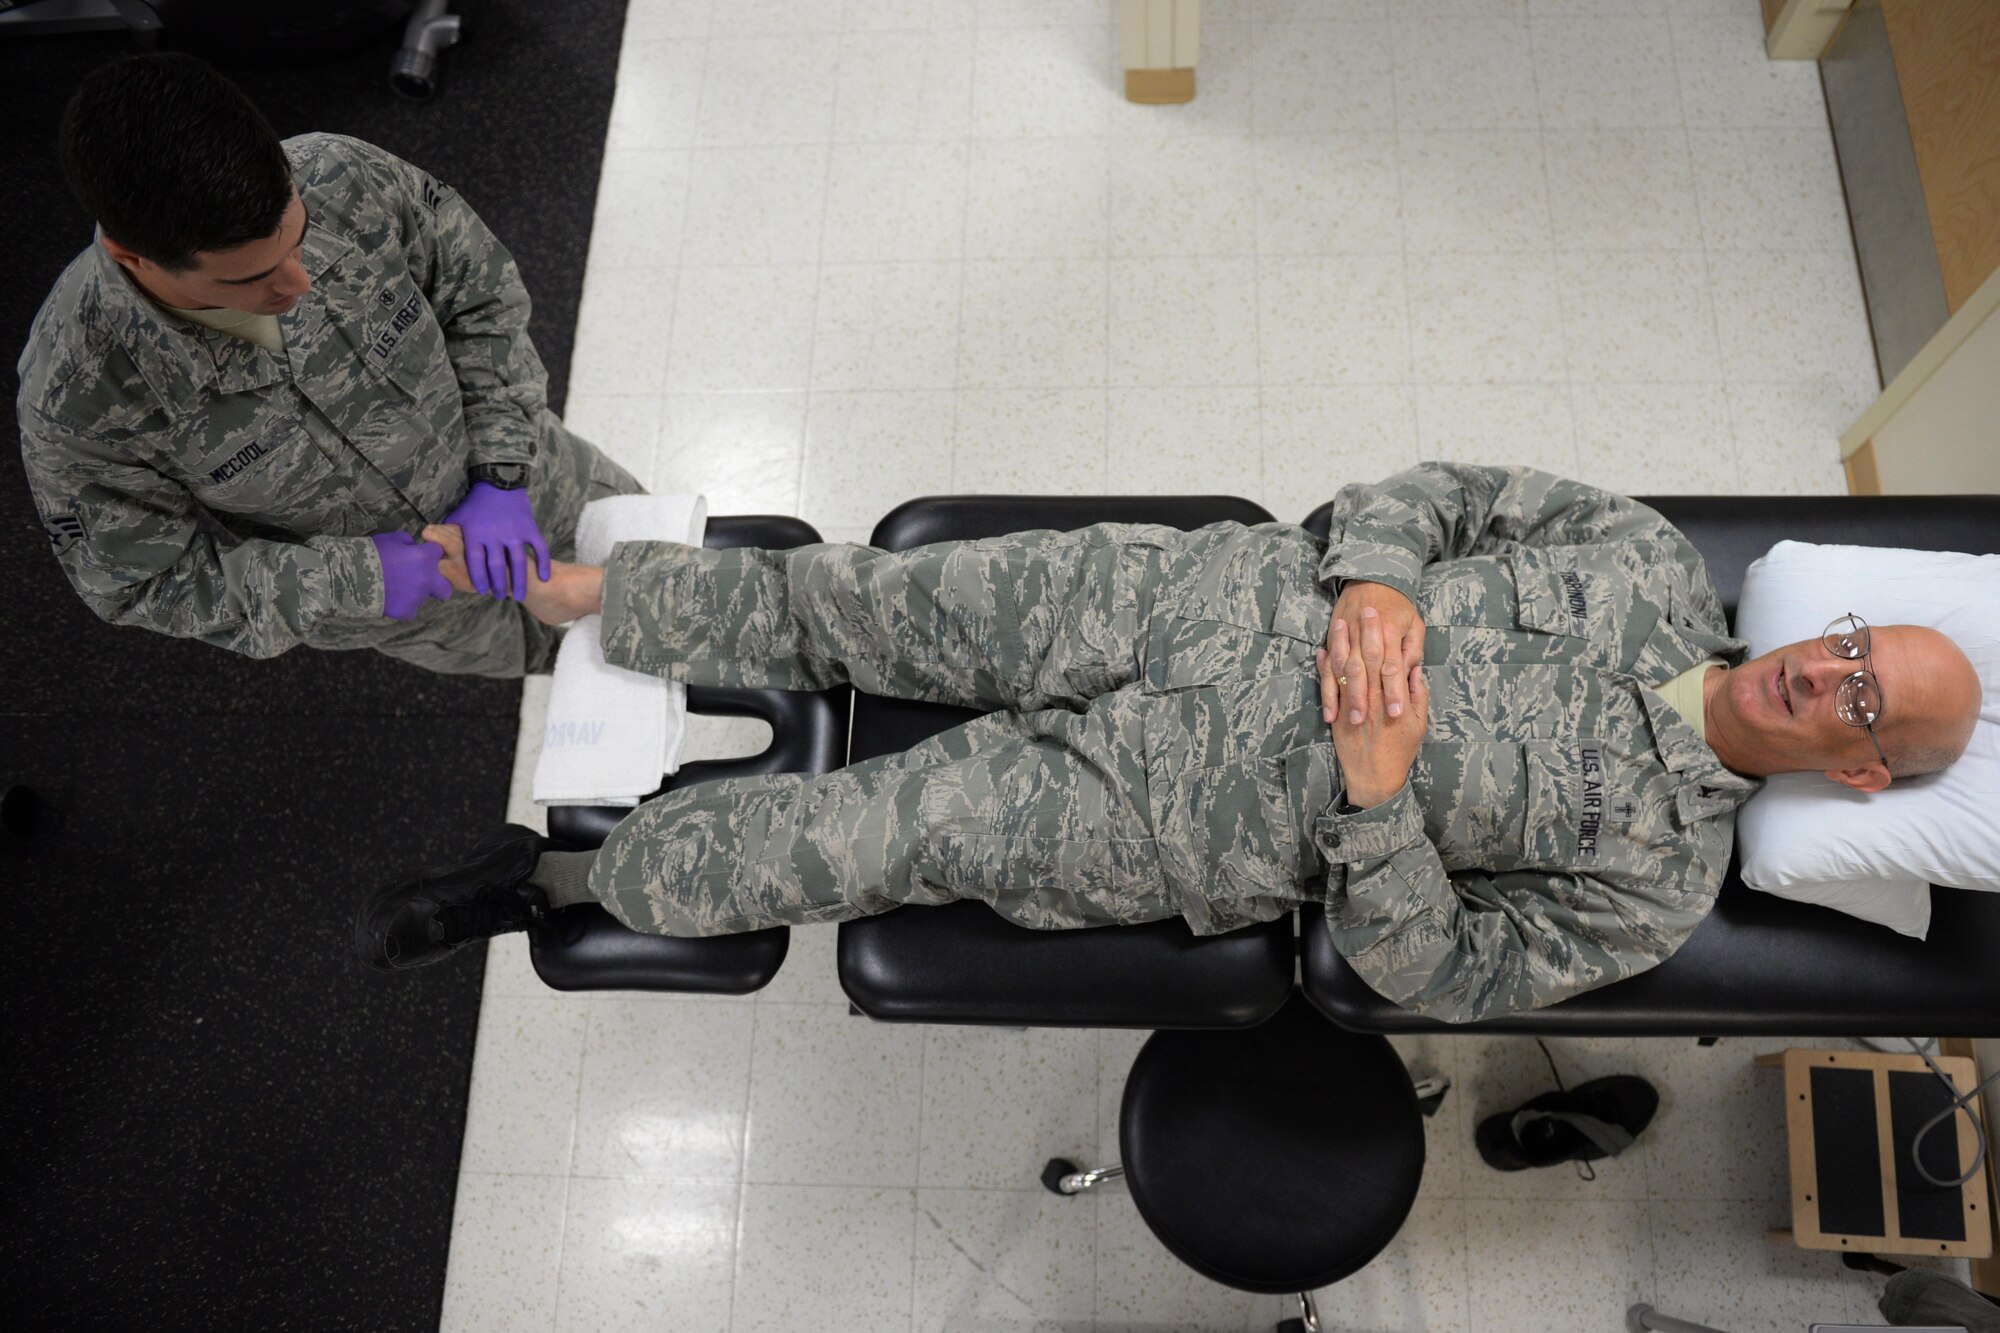 Senior Airman Wesley McCool, 81st Surgical Operations Squadron physical medical technician, works on Chaplain (Col.) David Terrinoni, 81st Training Wing chaplain, in the physical therapy department April 7, 2016, Keesler Air Force Base, Miss. McCool is working on Terrinoni’s toe mobilization by pulling his toe away, then curling and extending the toe to improve its range of motion. (Air Force Photo by Airman 1st Class Travis Beihl)